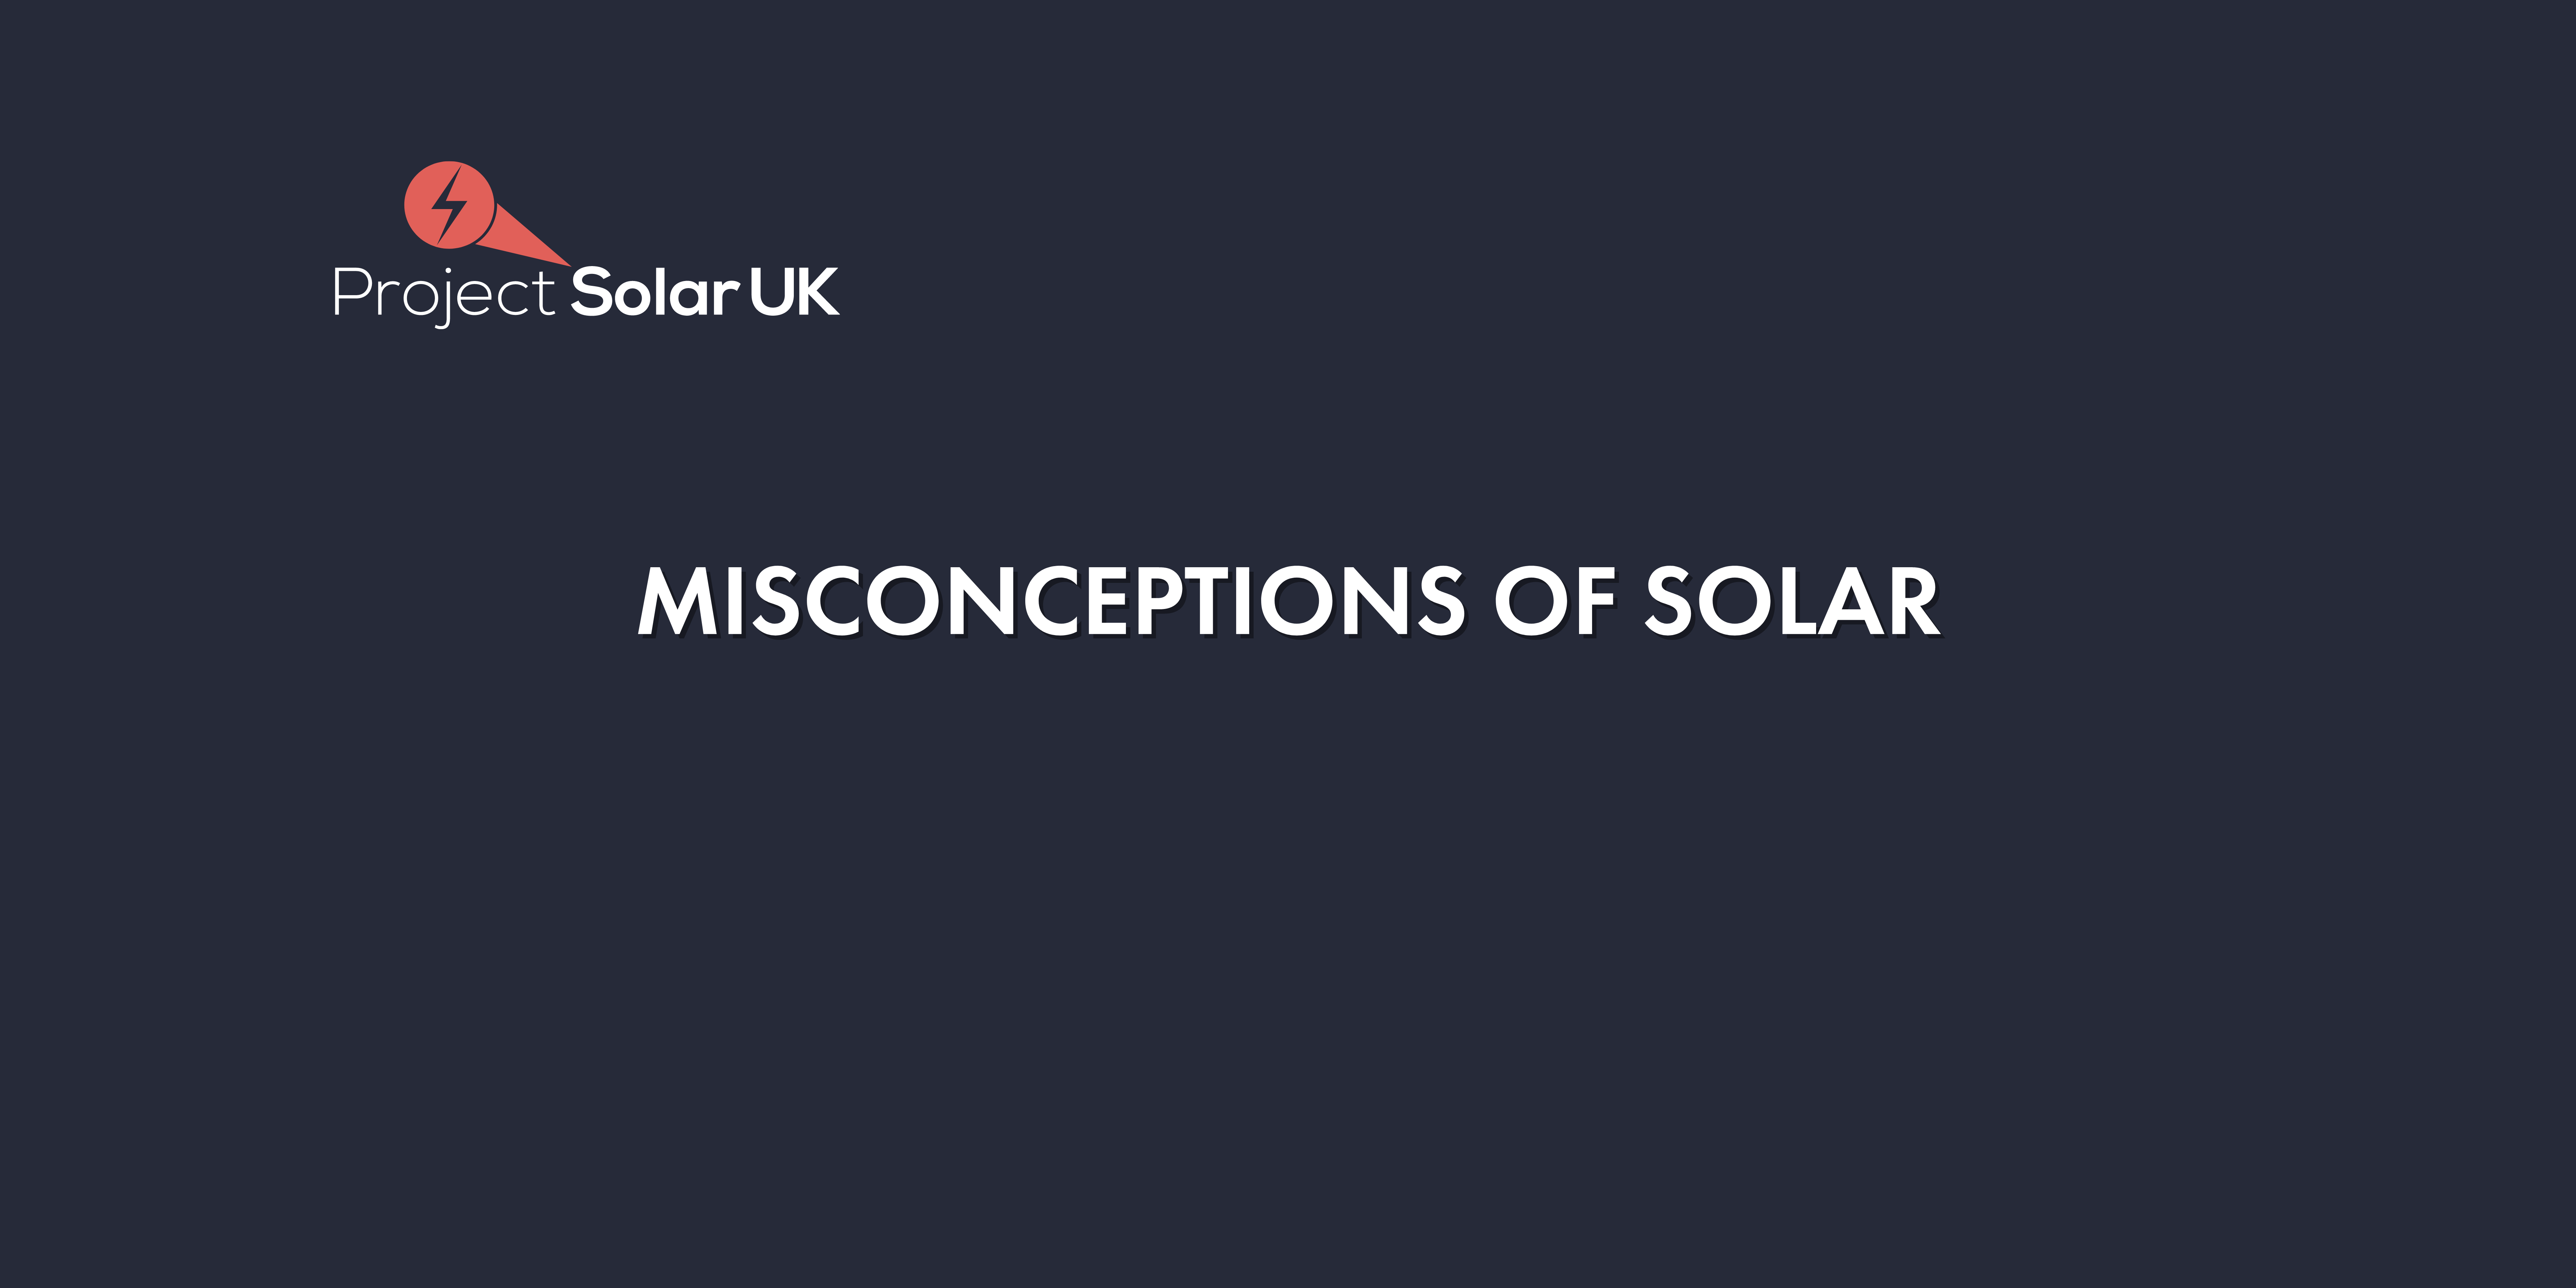 Misconceptions of solar